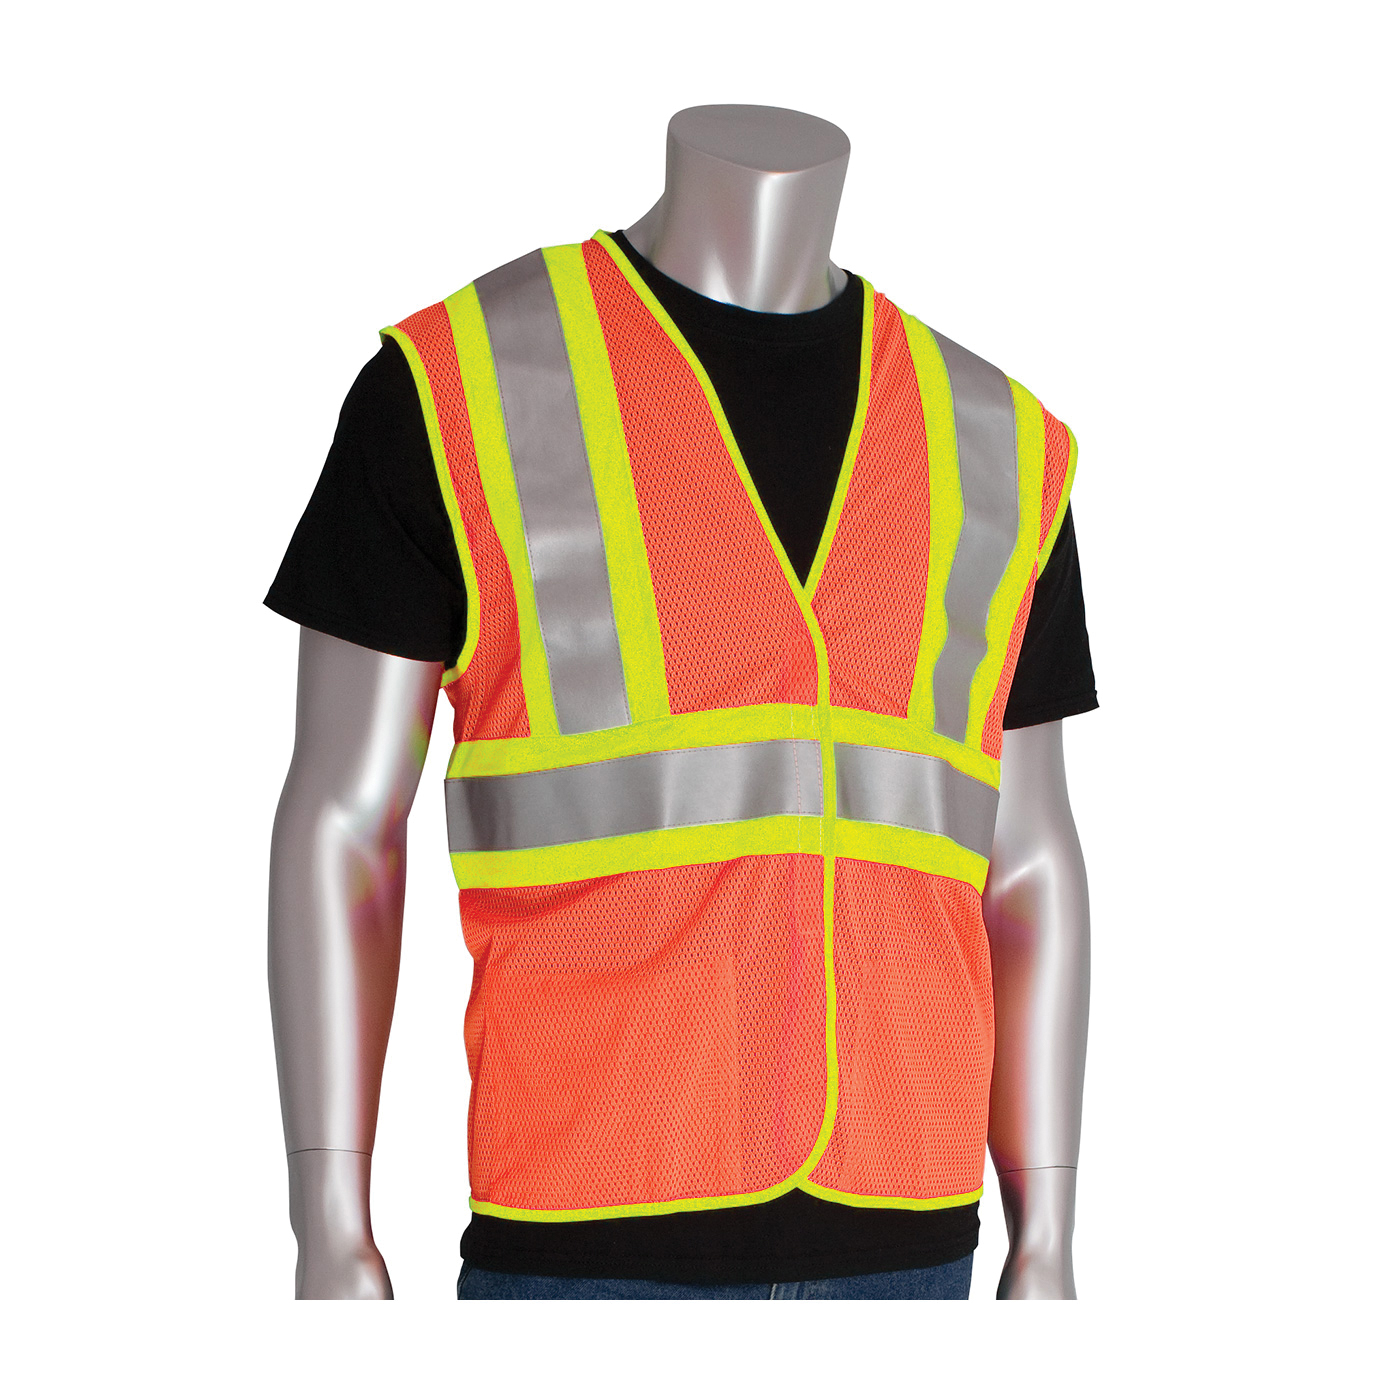 PIP® 305-MVFROR-4X/5X 2-Tone FR Treated Safety Vest, 4XL/5XL, Hi-Viz Orange, Polyester, Hook and Loop Closure, 2 Pockets, ANSI Class: Class 2, Specifications Met: ANSI Specified